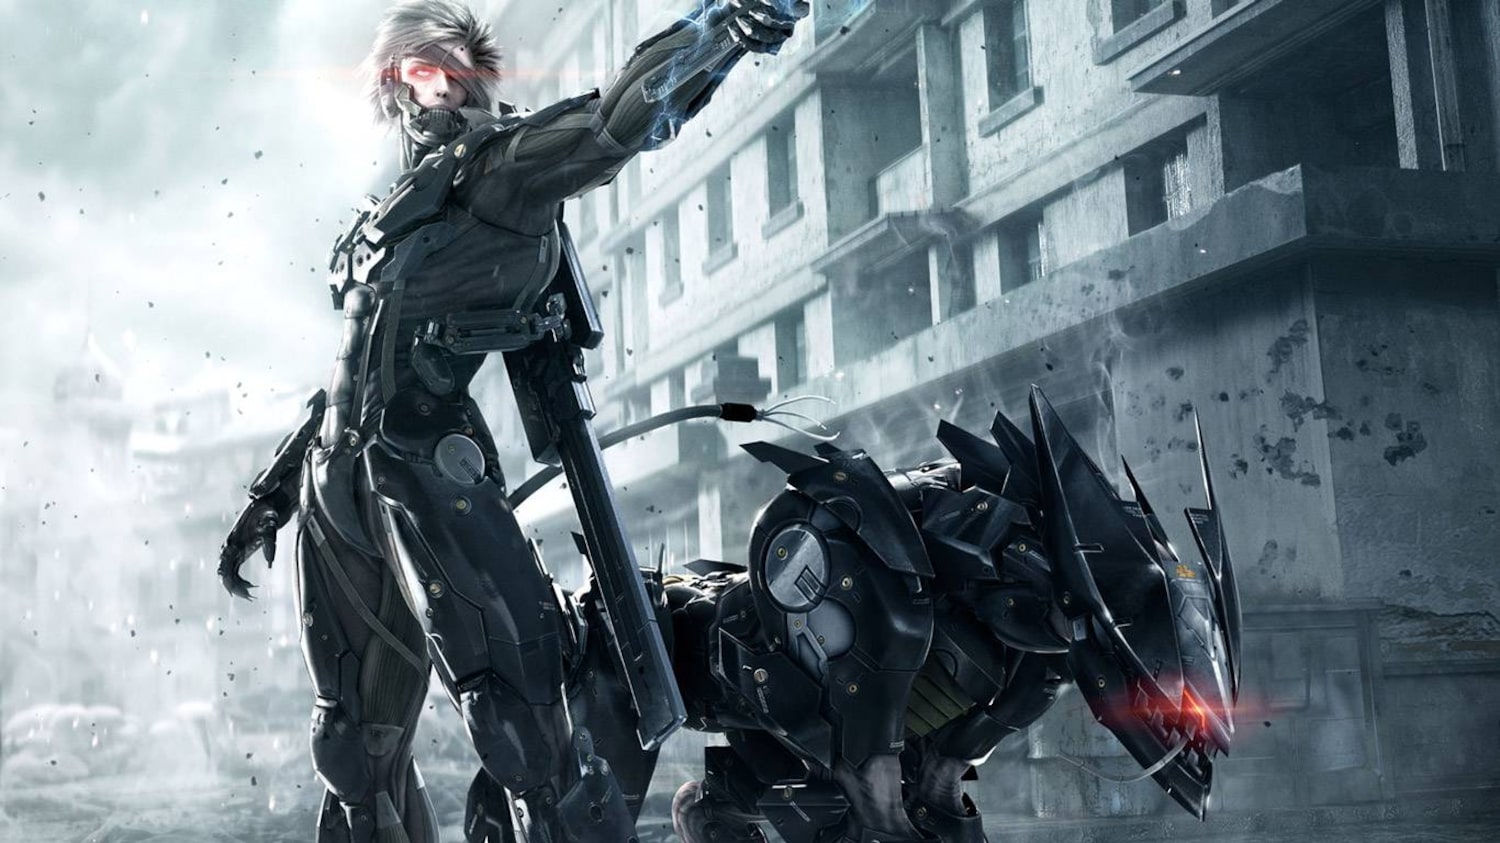 Metal Gear Rising: Revengeance Official Operation Guide Book